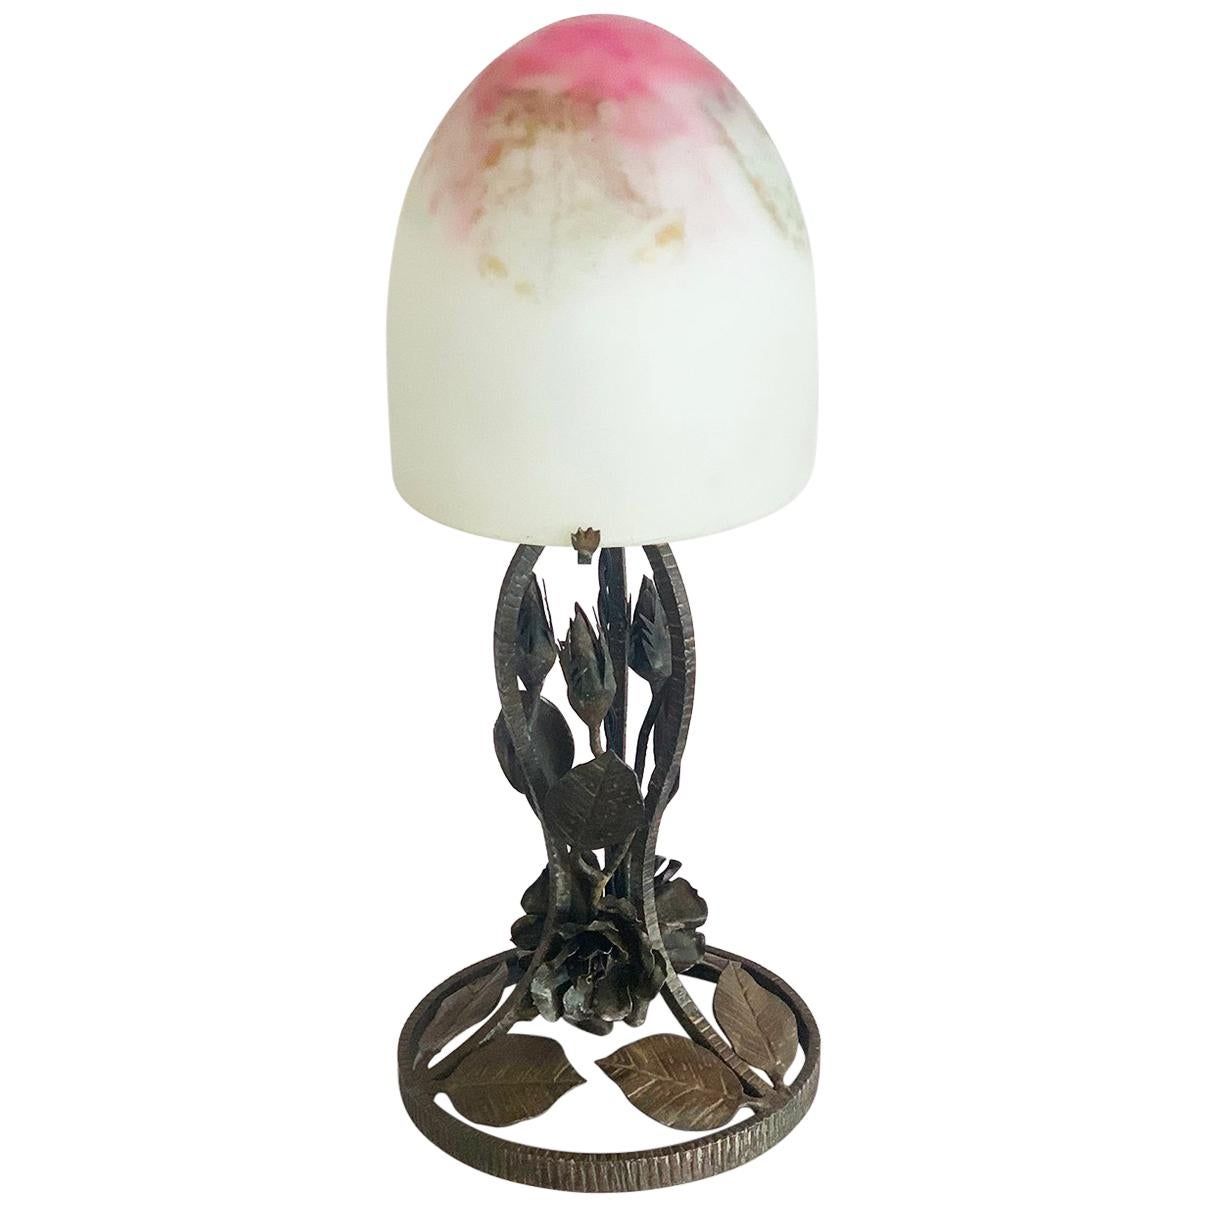 Art Deco French Pate De Verre Dome Lamp Signed Crespin For Sale